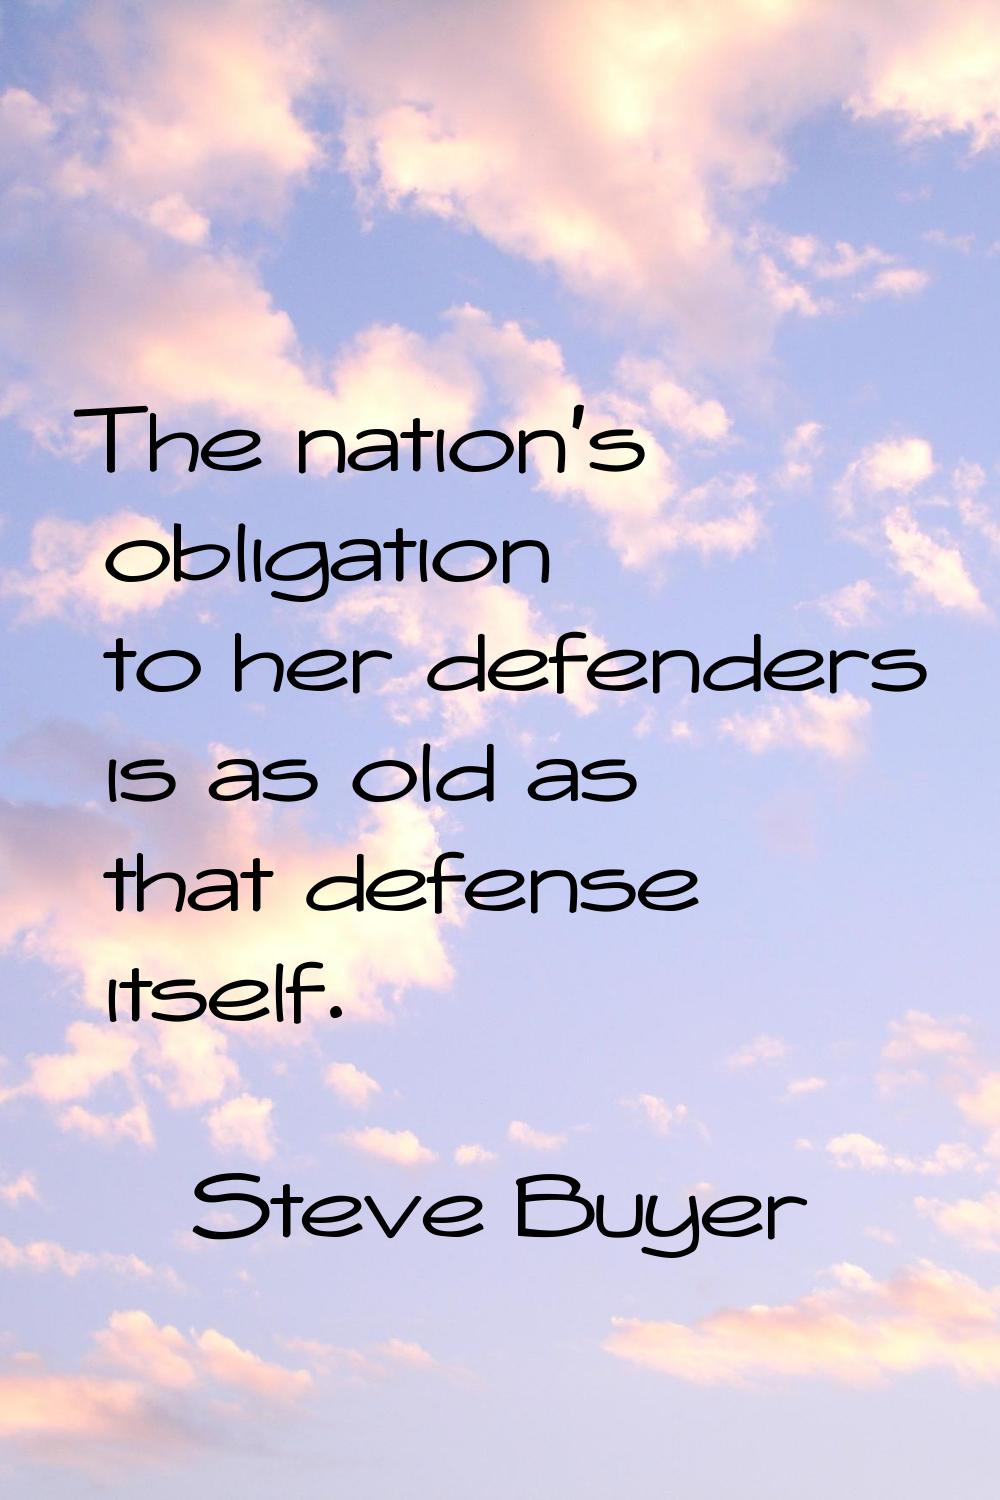 The nation's obligation to her defenders is as old as that defense itself.